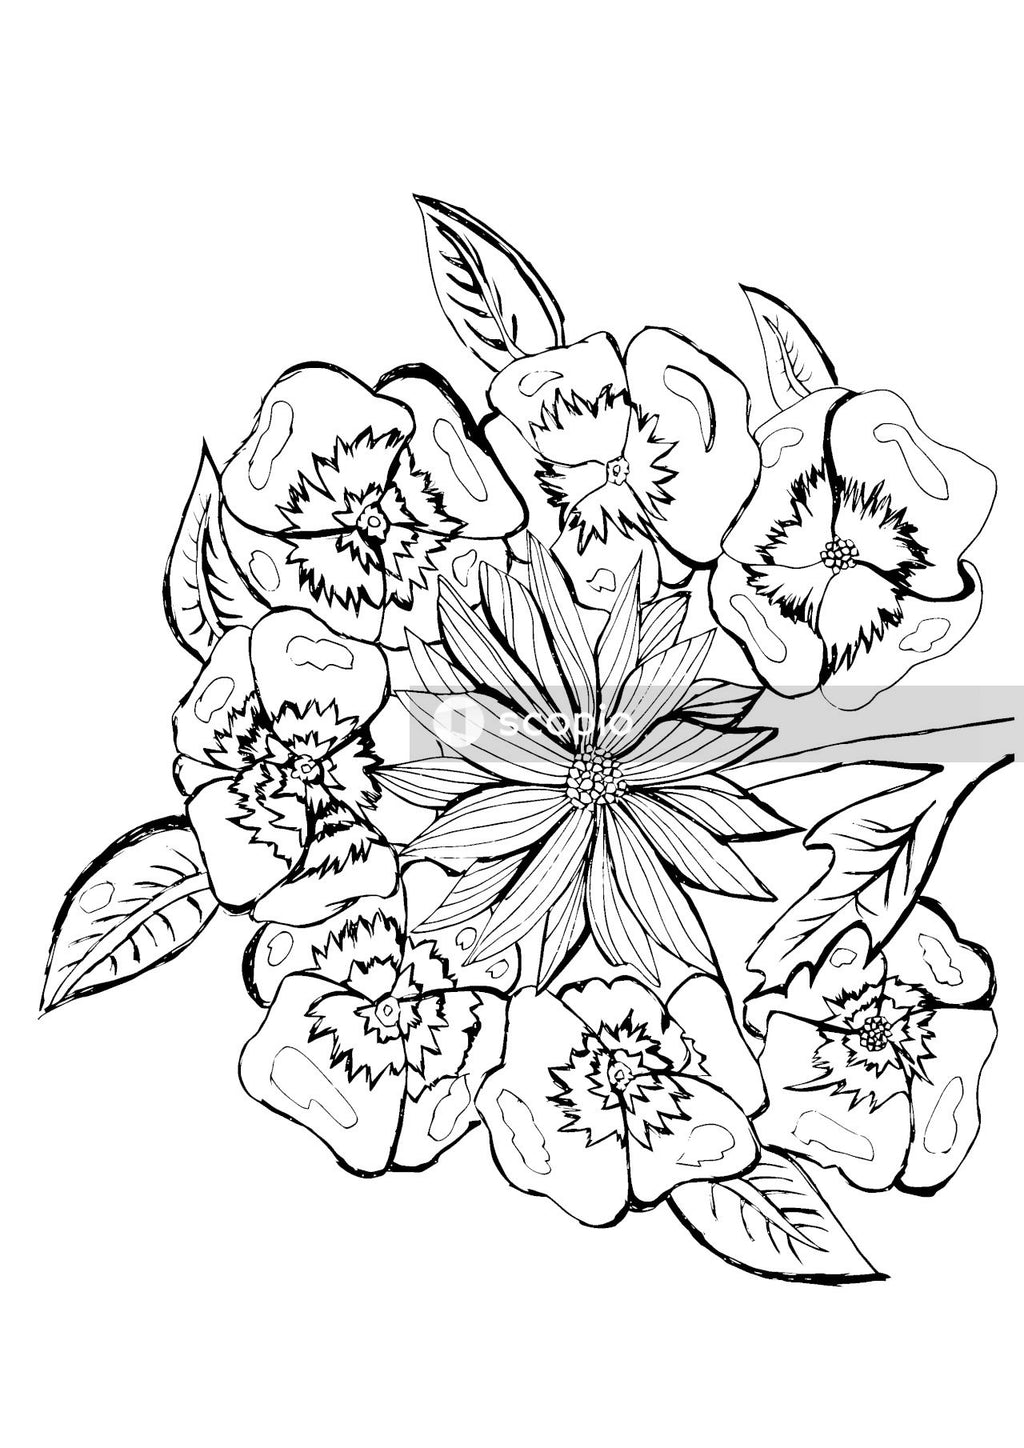 Black and white flower sketch